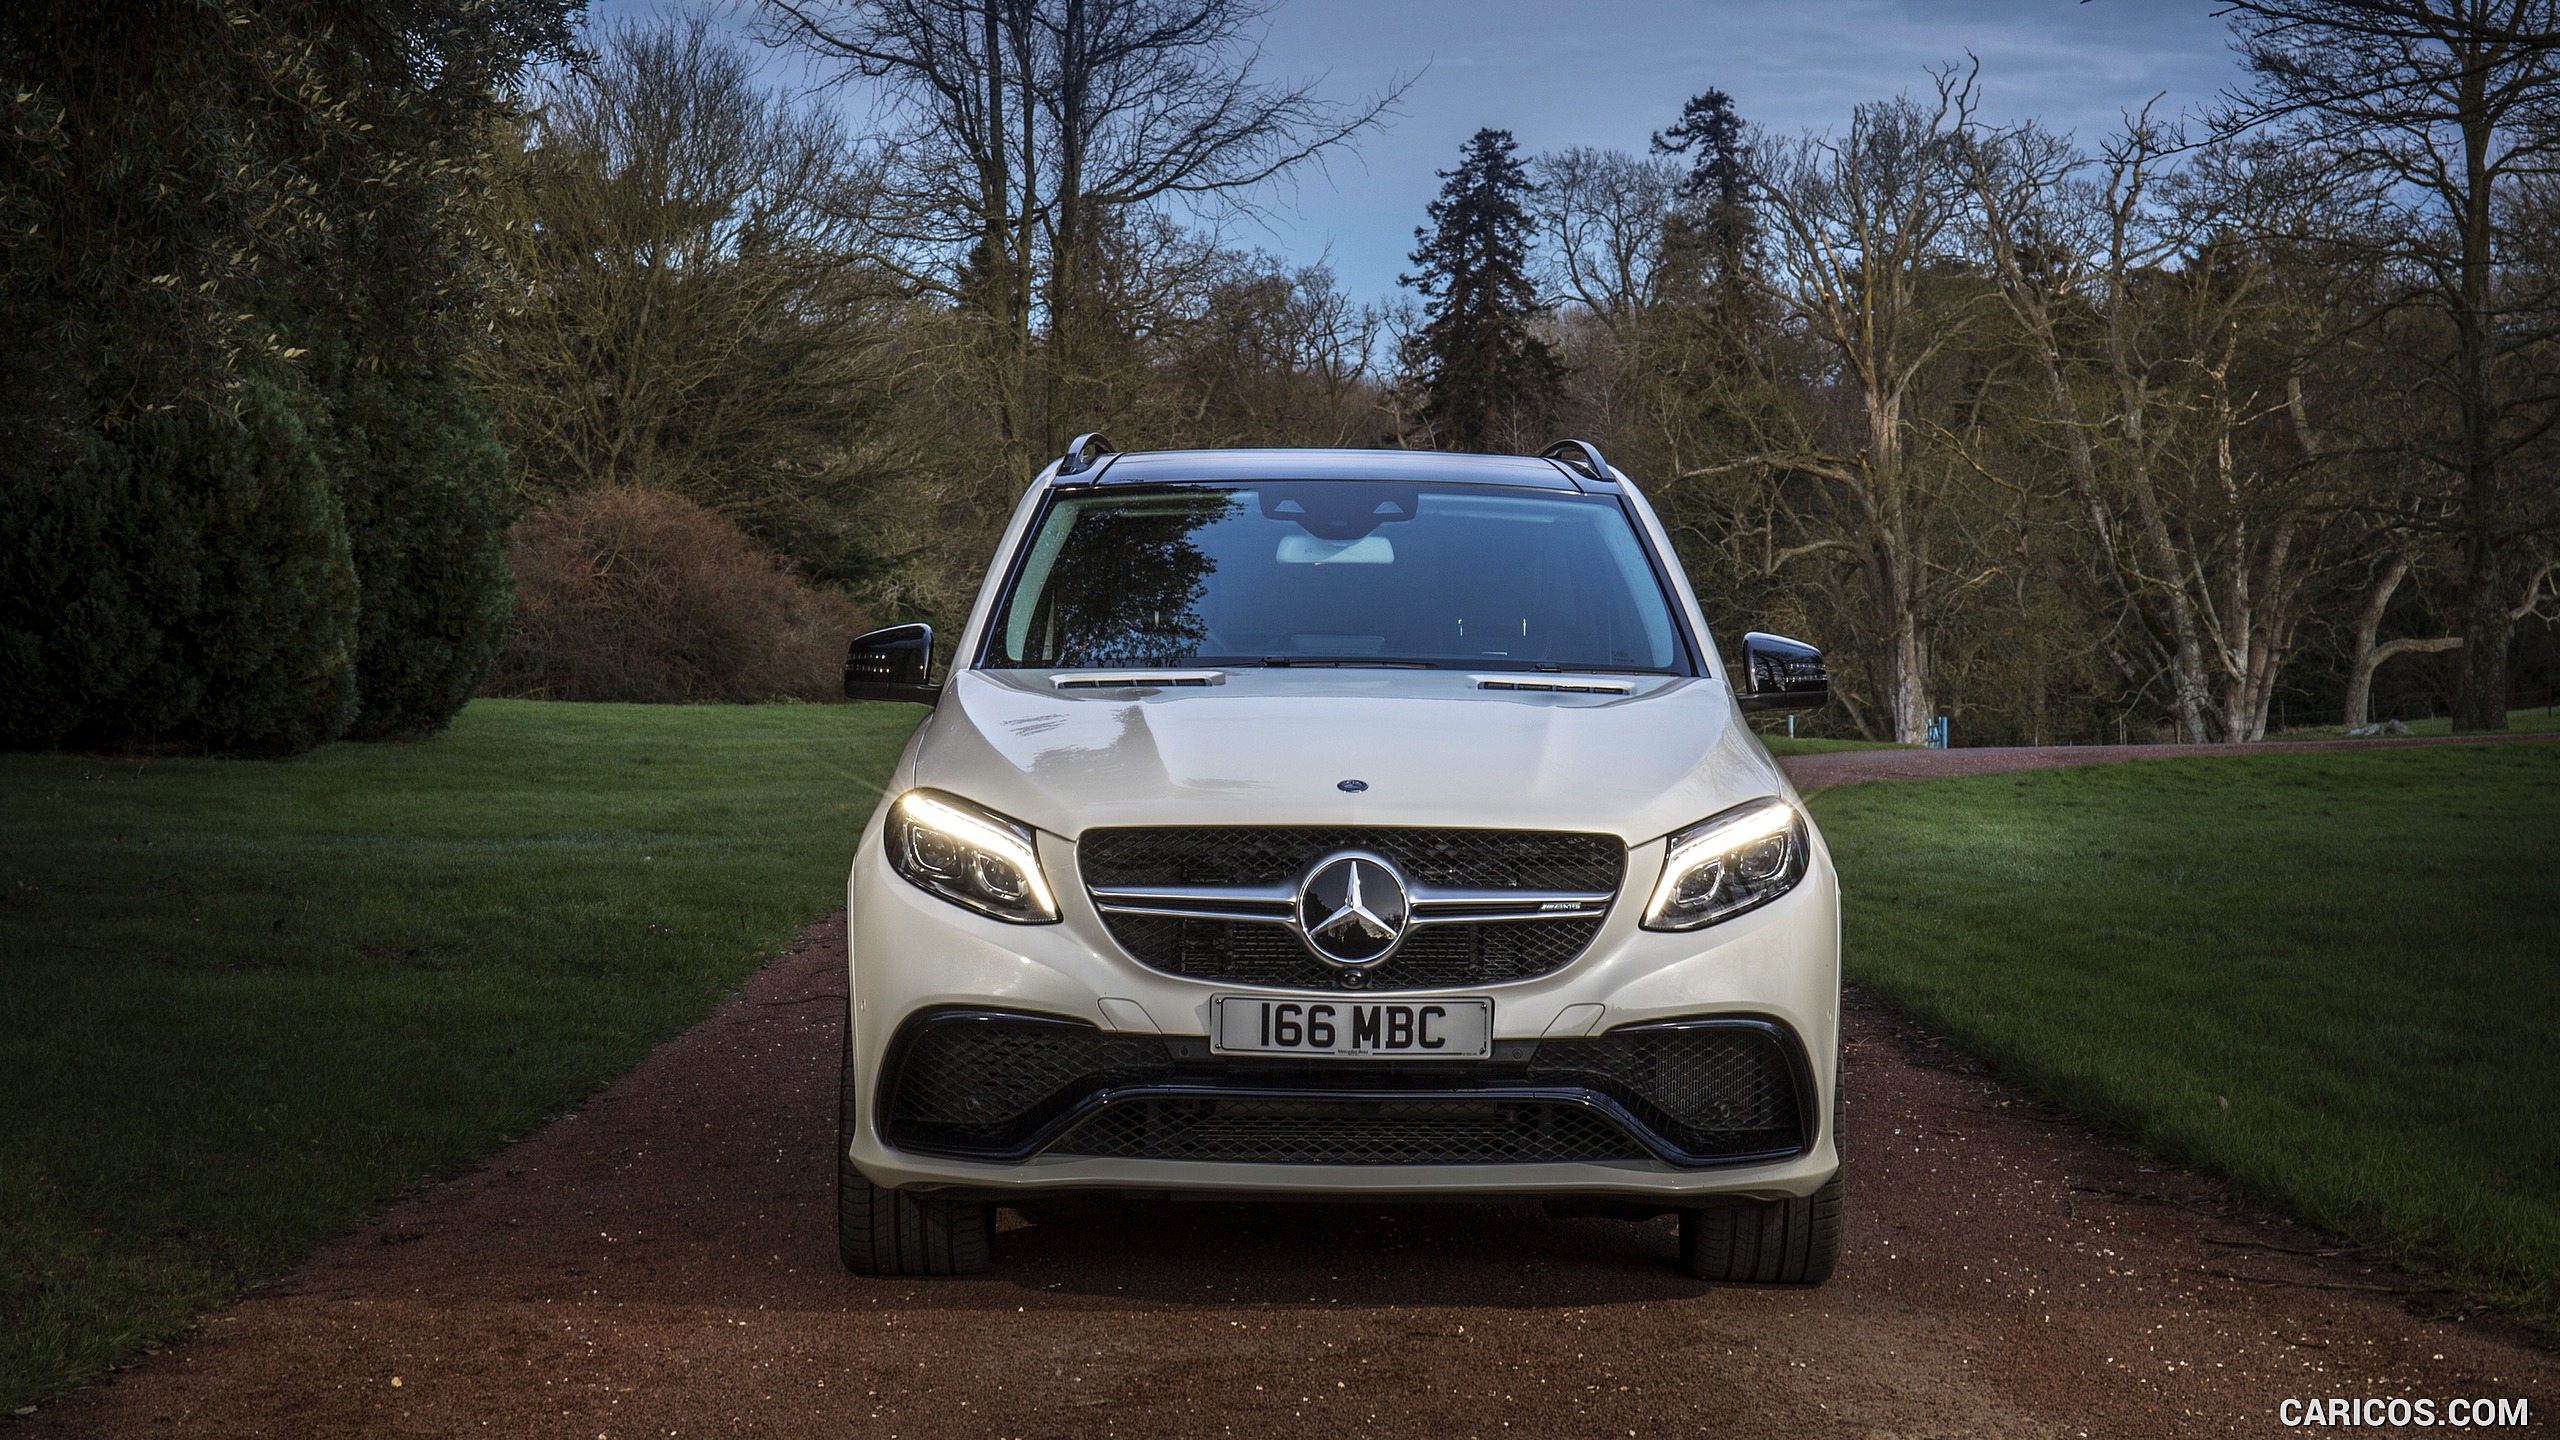 2016 Mercedes-AMG GLE 63 S (UK-Spec) - Front, #50 of 68